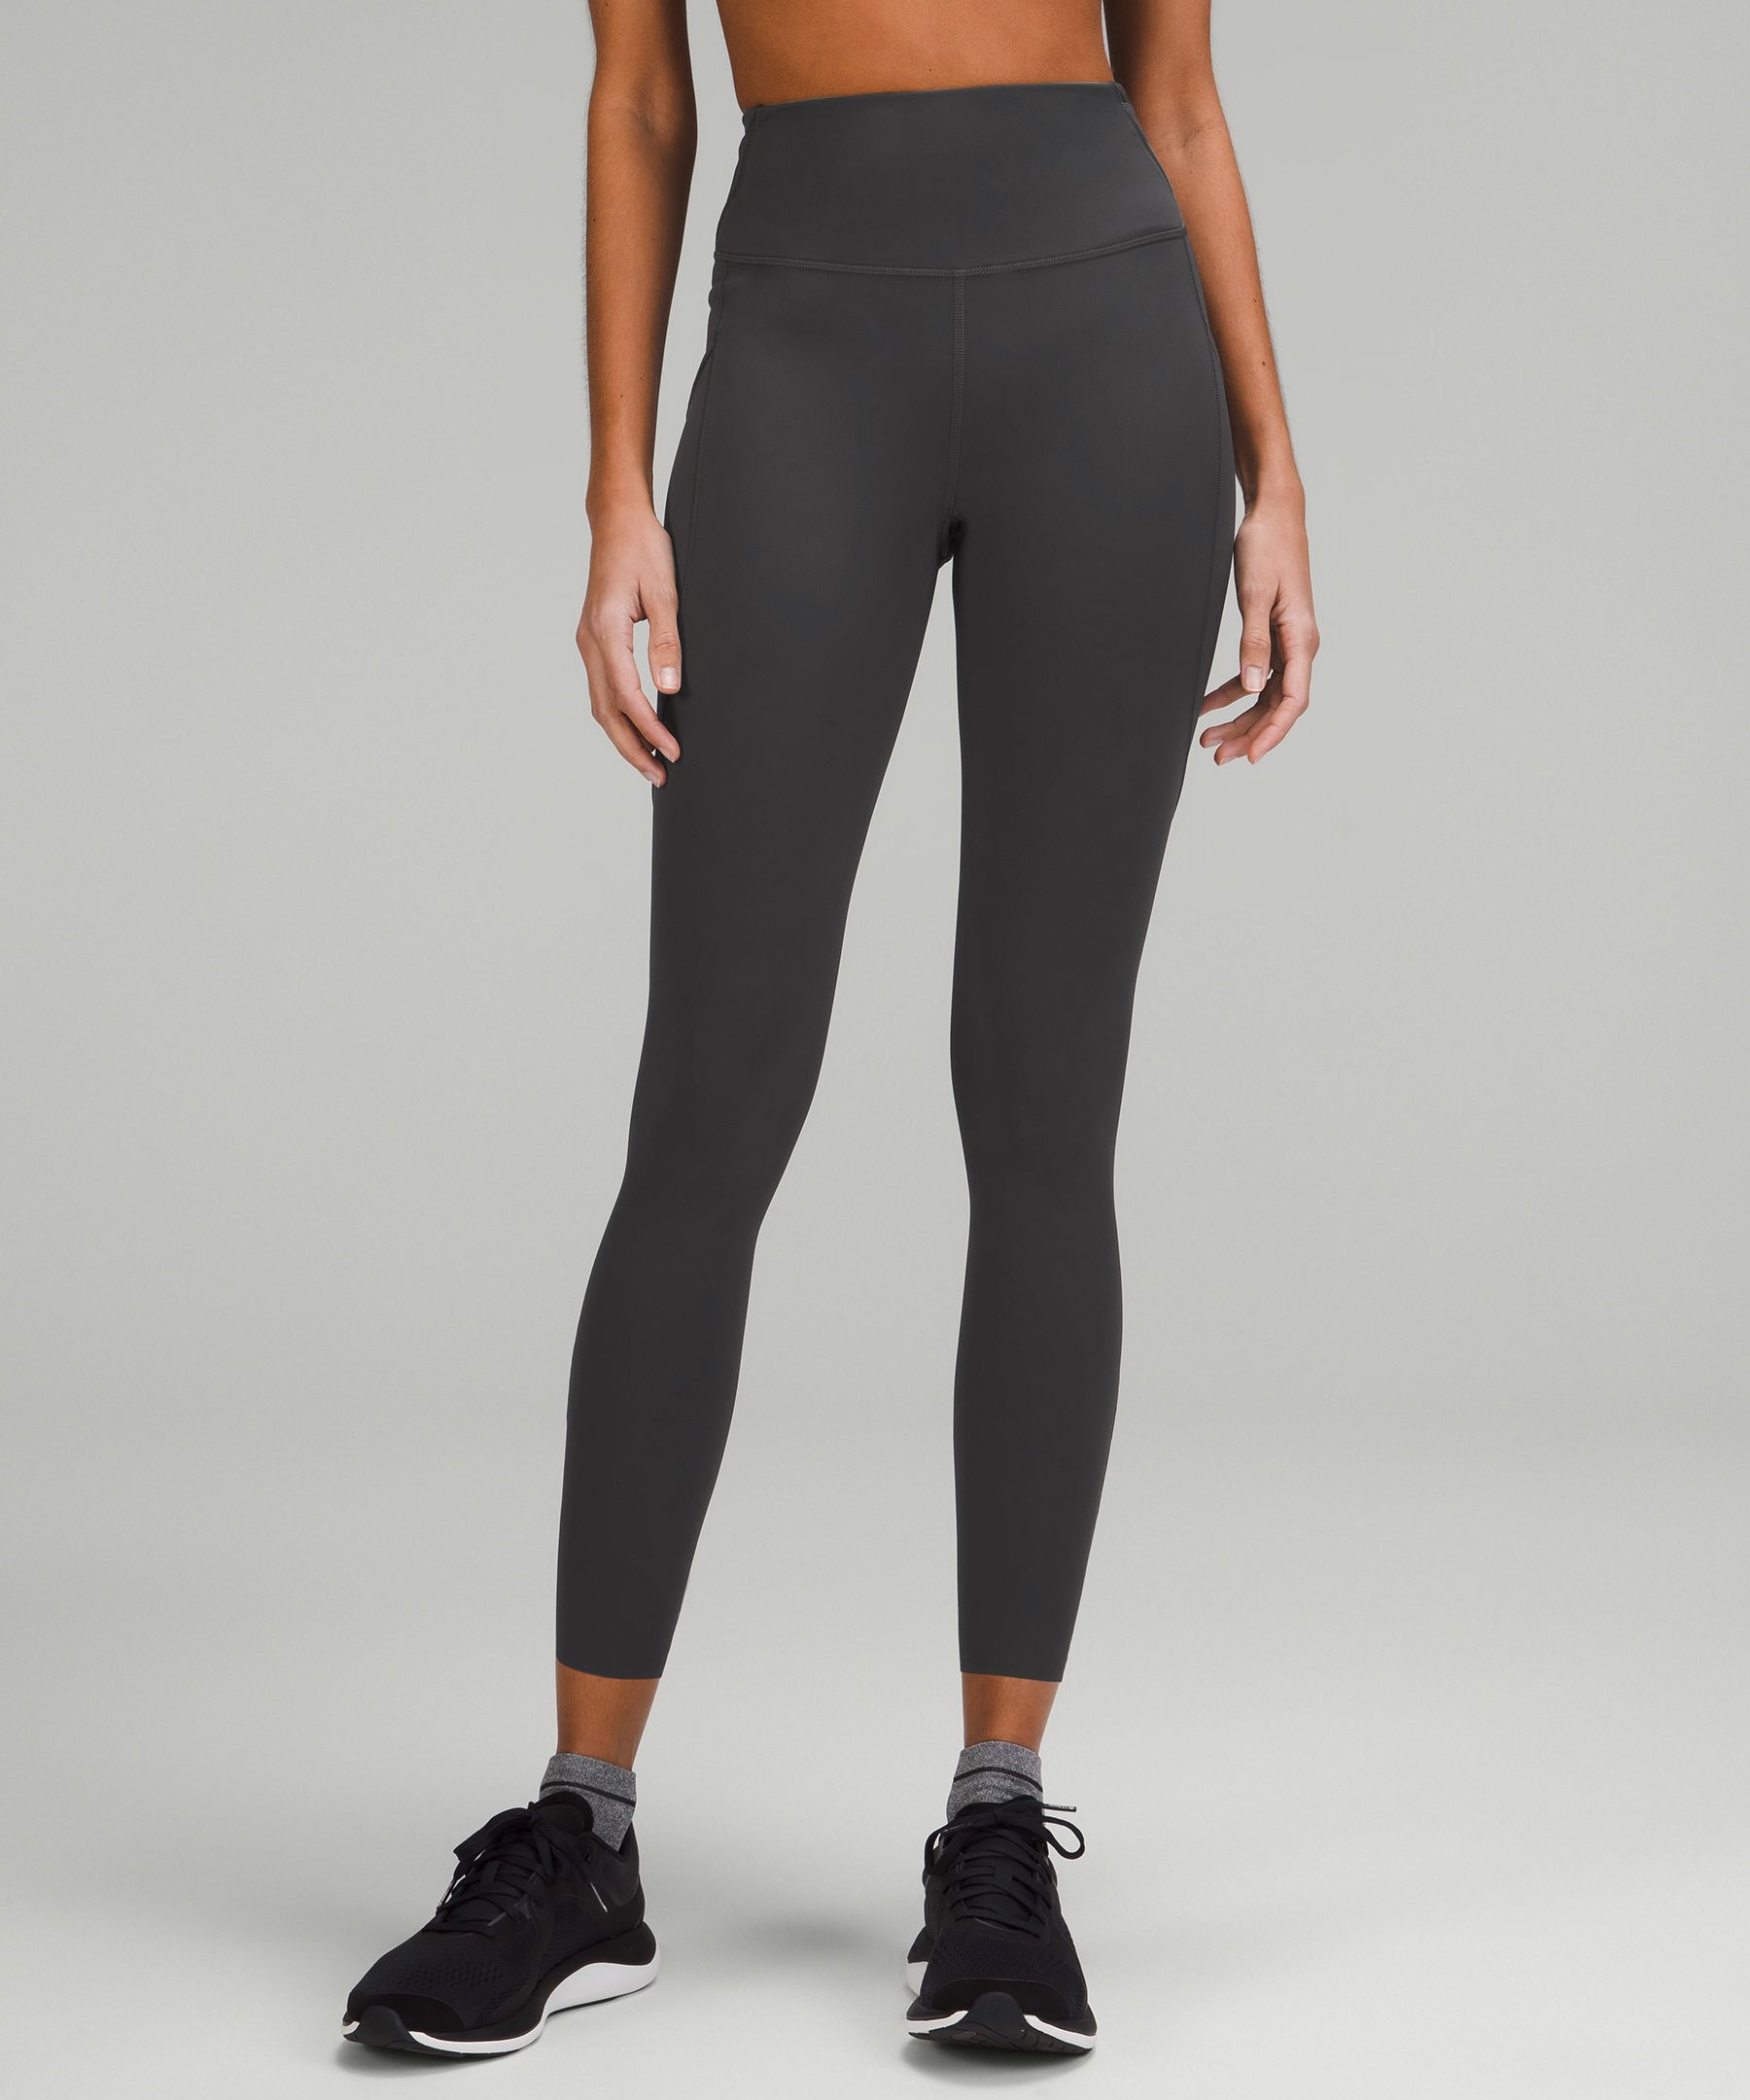 Fast and Free High-Rise Tight 25” Pockets *Updated | Women's Leggings/Tights | lululemon